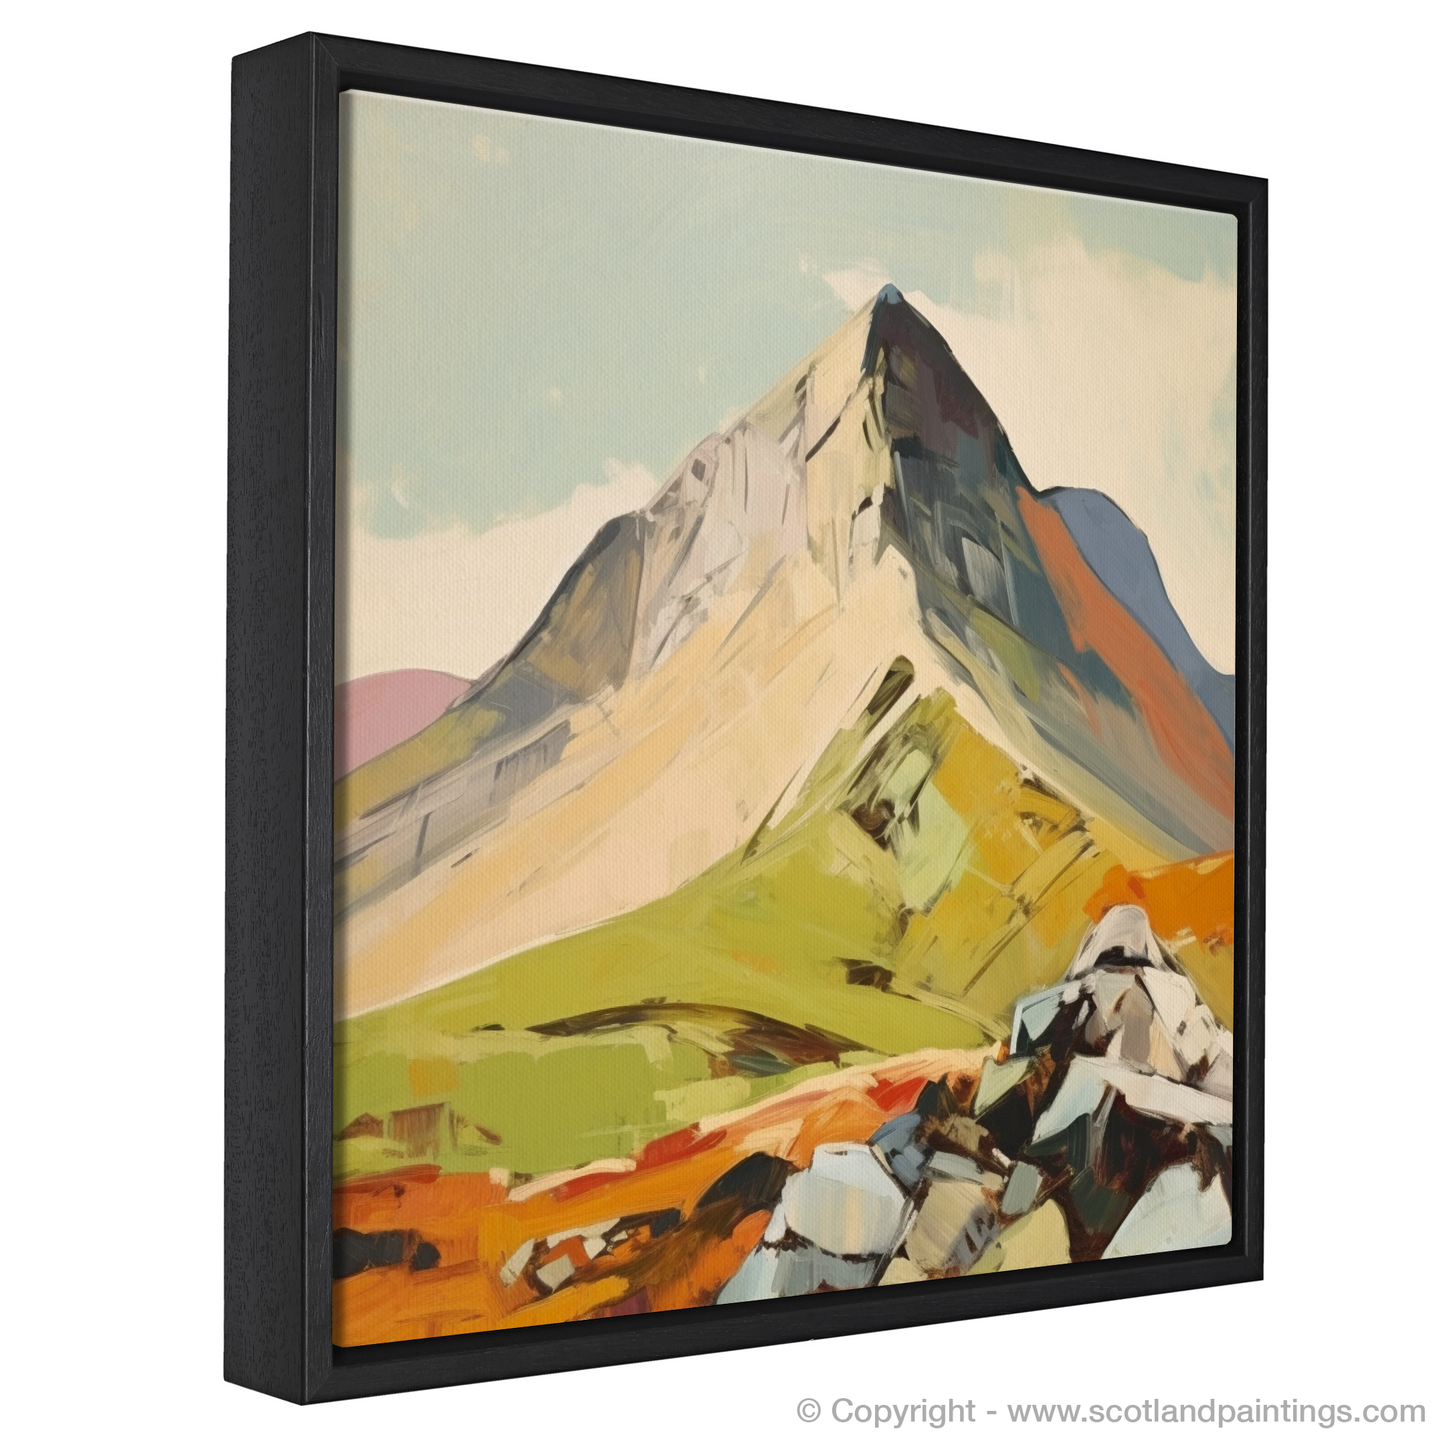 Painting and Art Print of A mountain in Scotland entitled "Embracing the Wild: Abstract Ode to a Scottish Mountain".